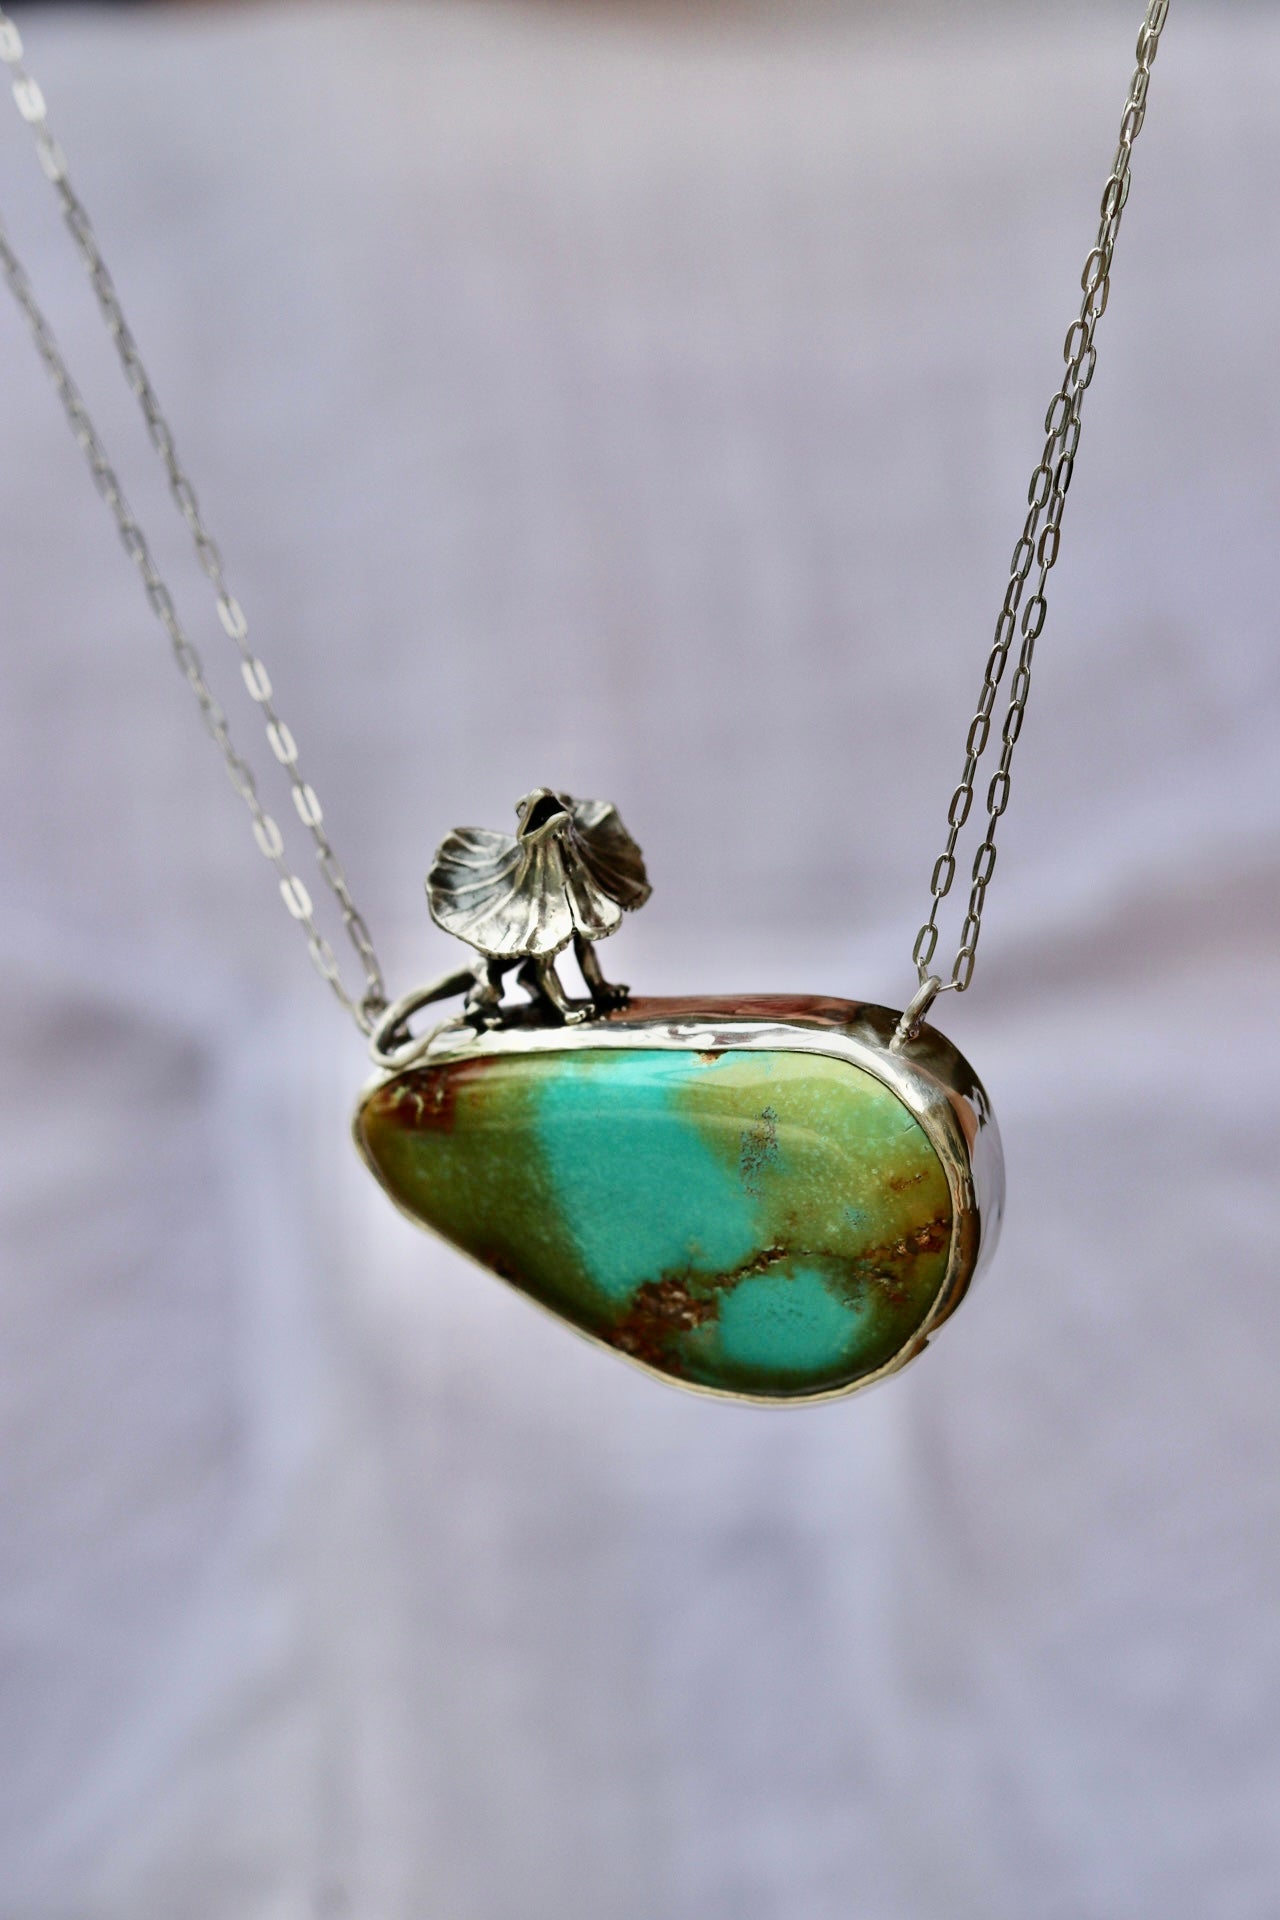 Frilled Neck Lizard Turquoise necklace.